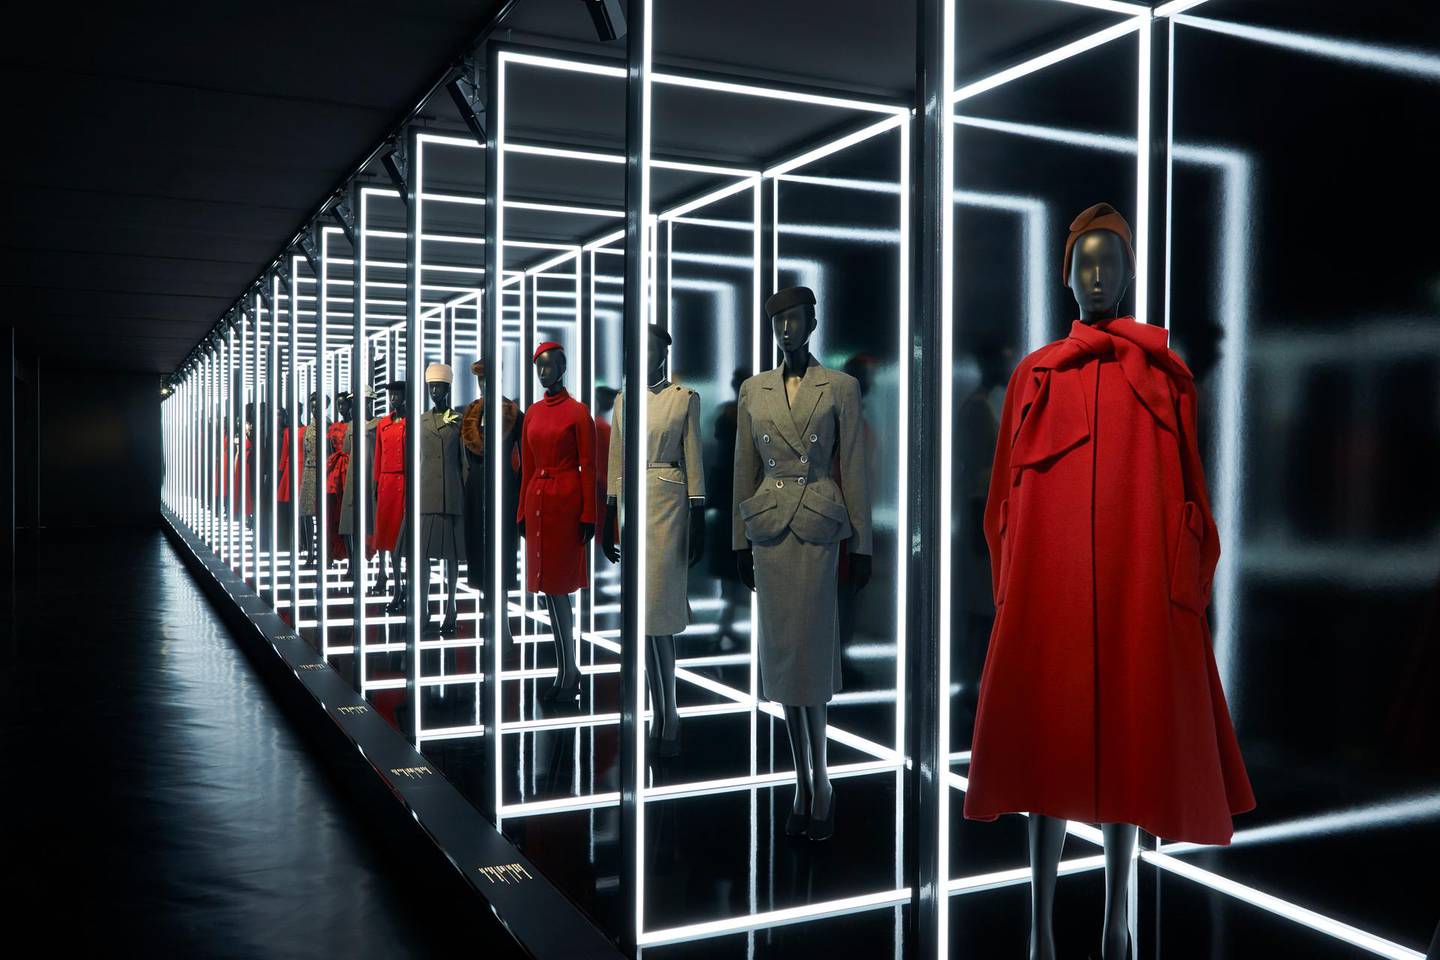 A procession of day looks in the Christian Dior: Designer Of Dreams exhibition. The exhibtion will open in New York in the autumn. Photo by Adrien Dirand